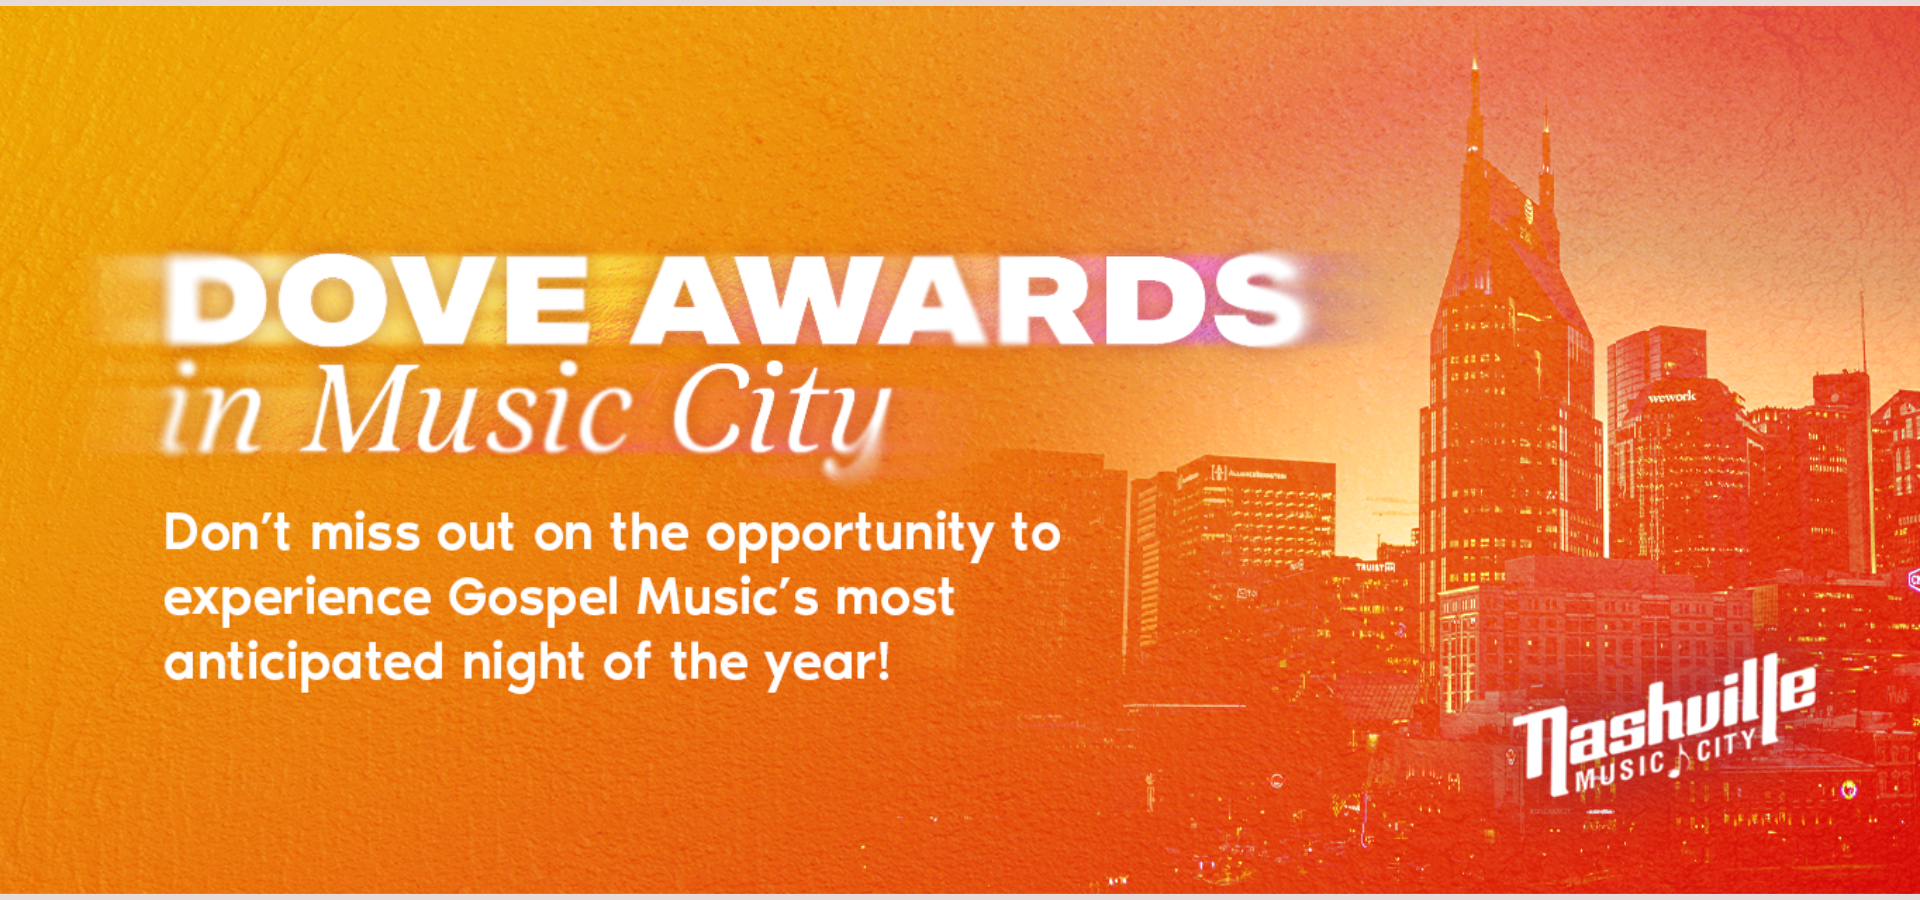 Dove Awards Giveaway with Nashville Music City